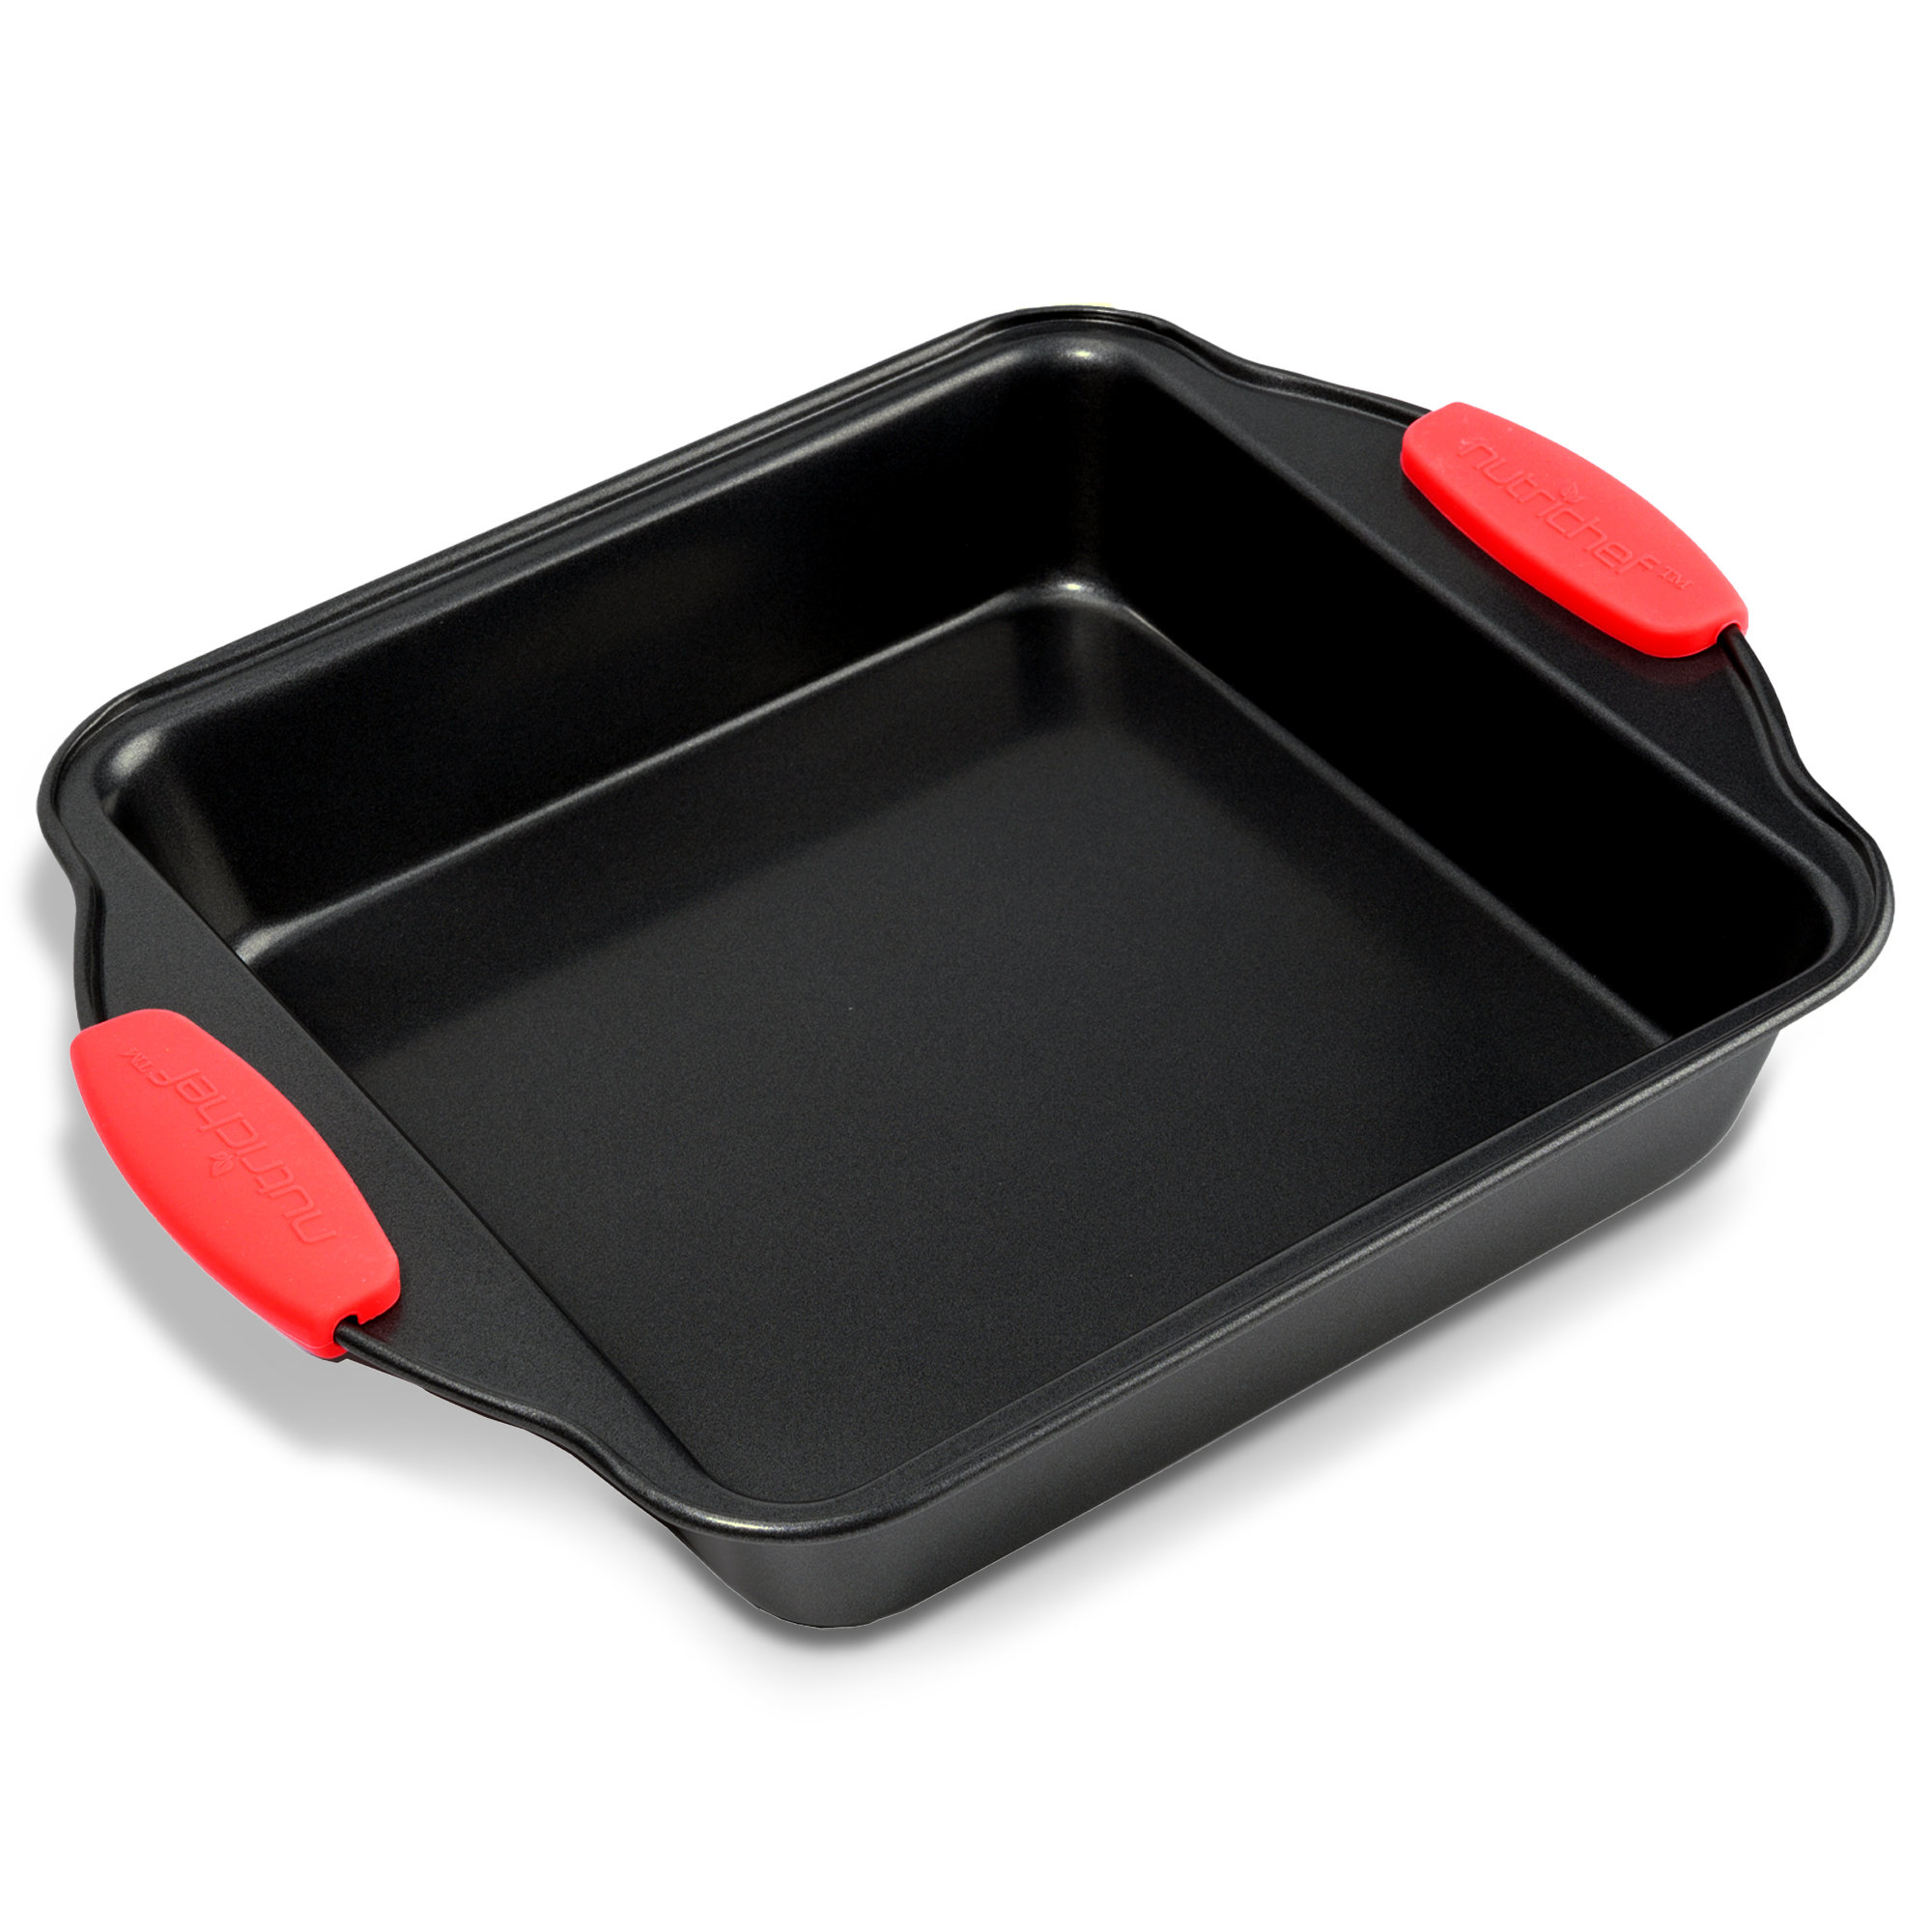 NutriChef Non-Stick Loaf Pan - Deluxe Nonstick Gray Coating Inside and  Outside with Red Silicone Handles